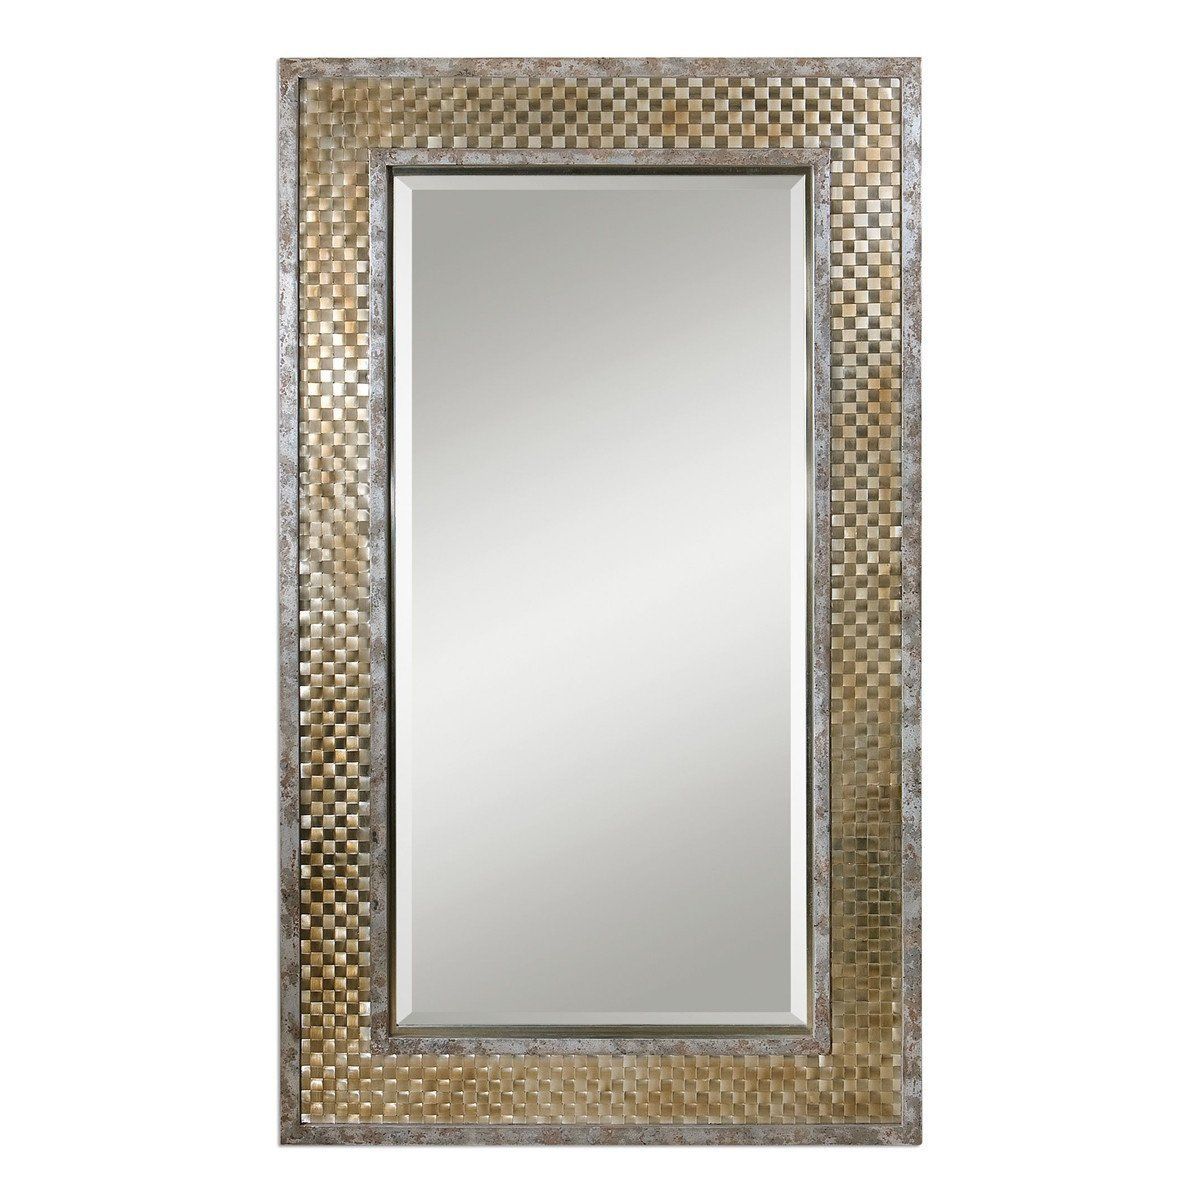 Mondego Woven Nickel Mirror | Brushed Nickel Mirror, Rectangular Mirror In Brushed Nickel Rectangular Wall Mirrors (View 6 of 15)